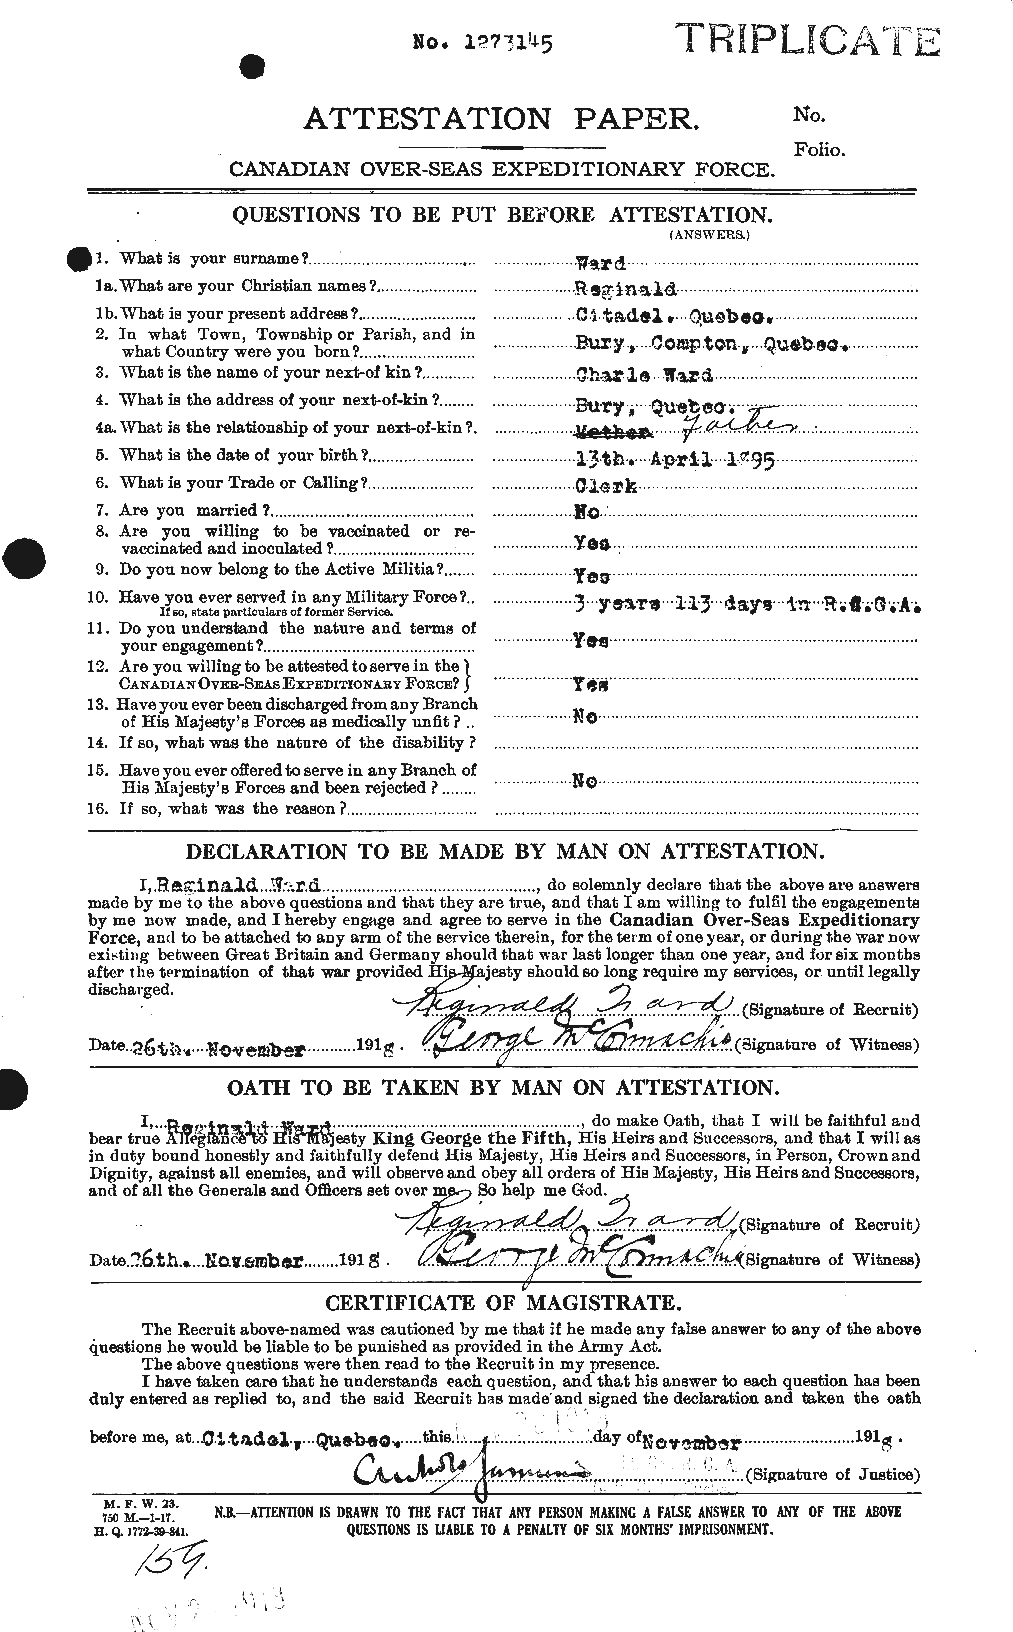 Personnel Records of the First World War - CEF 659641a